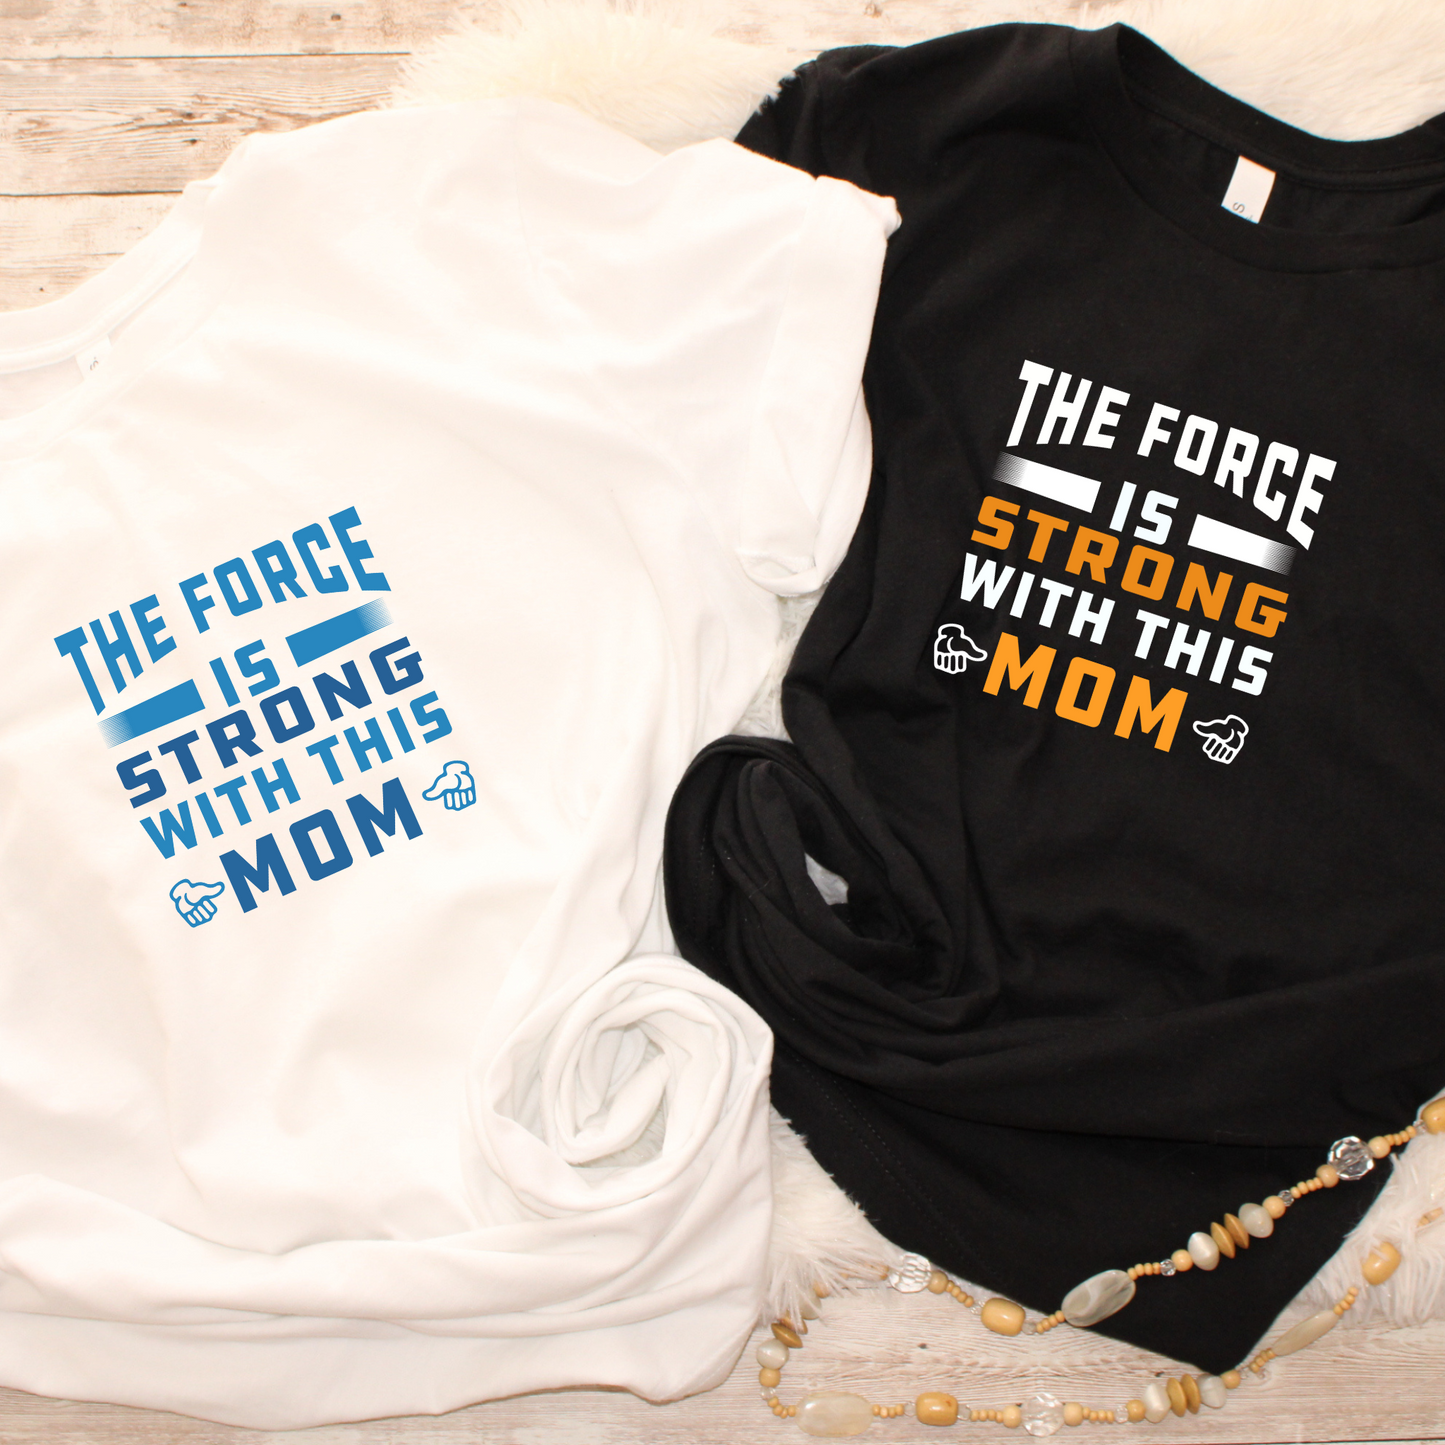 The Force is Strong with this Mom T-Shirt - Eb Creations Shirts & Tops The Force is Strong with this Mom T-Shirt